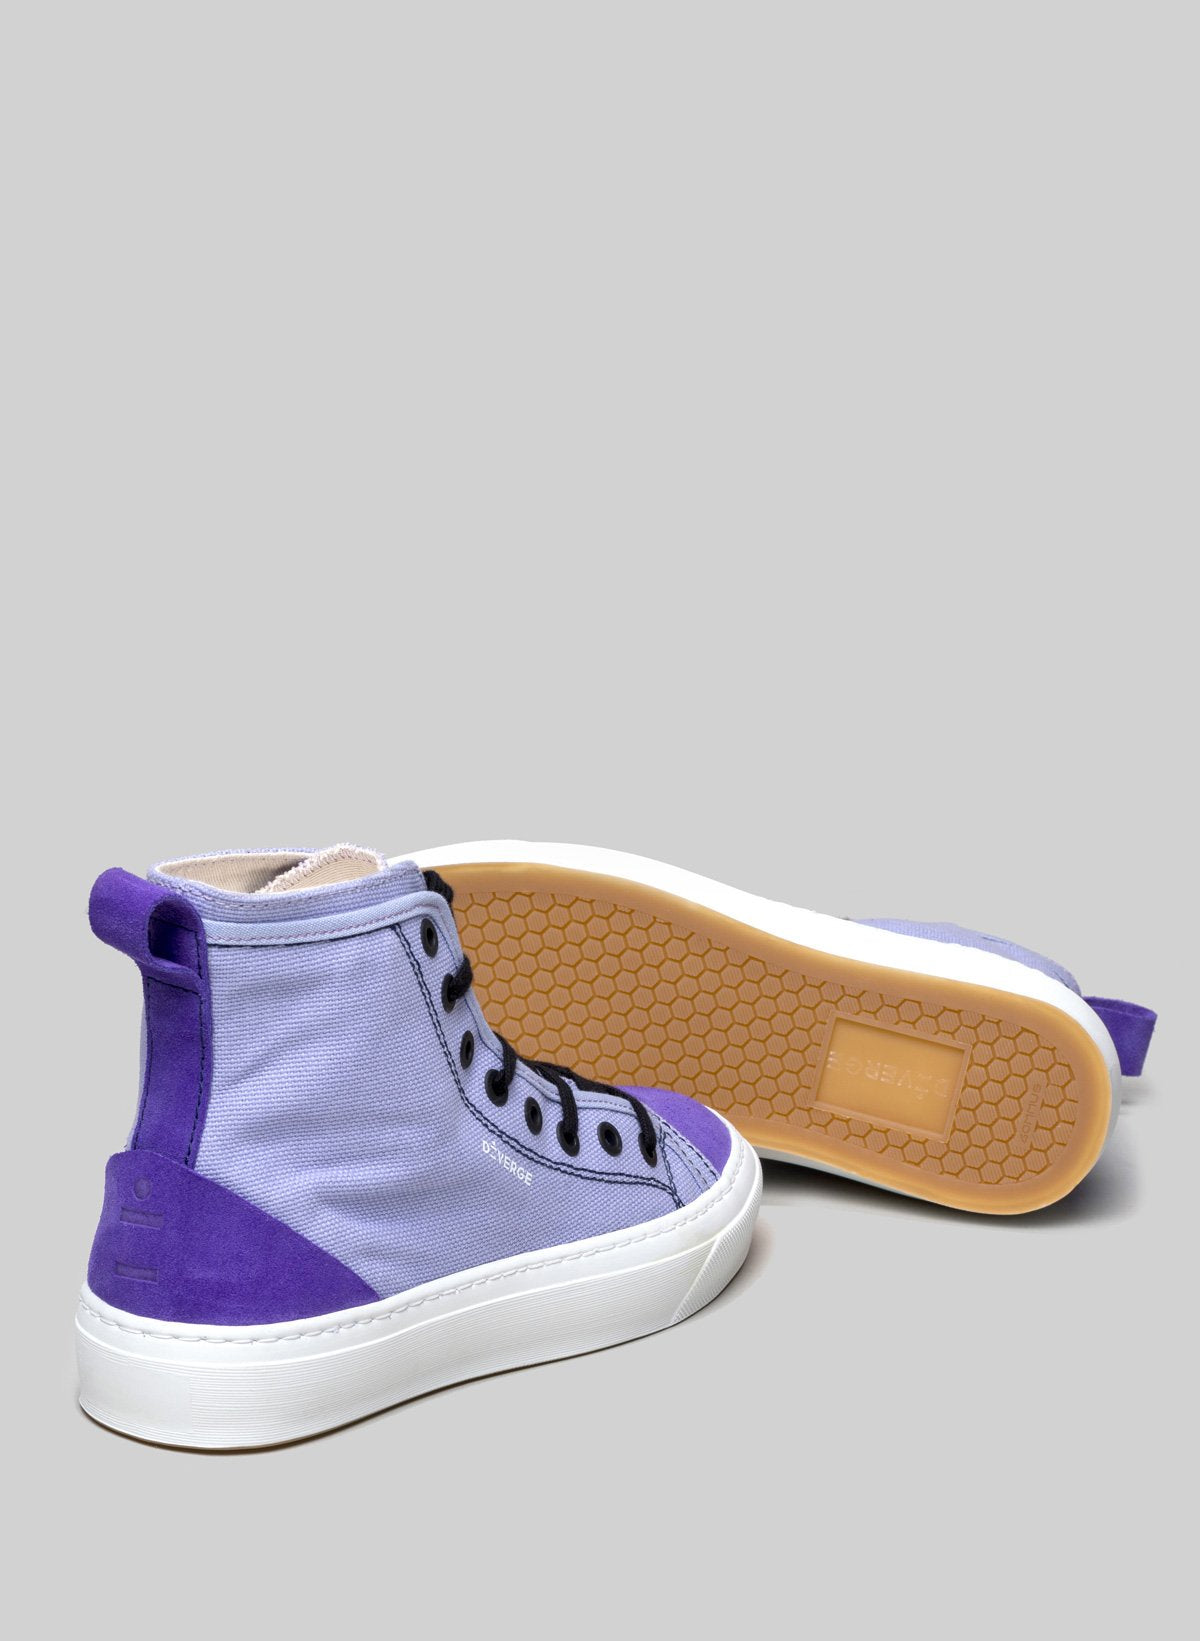 High top purple sneakers by Diverge, promoting social impact and custom shoes throught the imagine project.